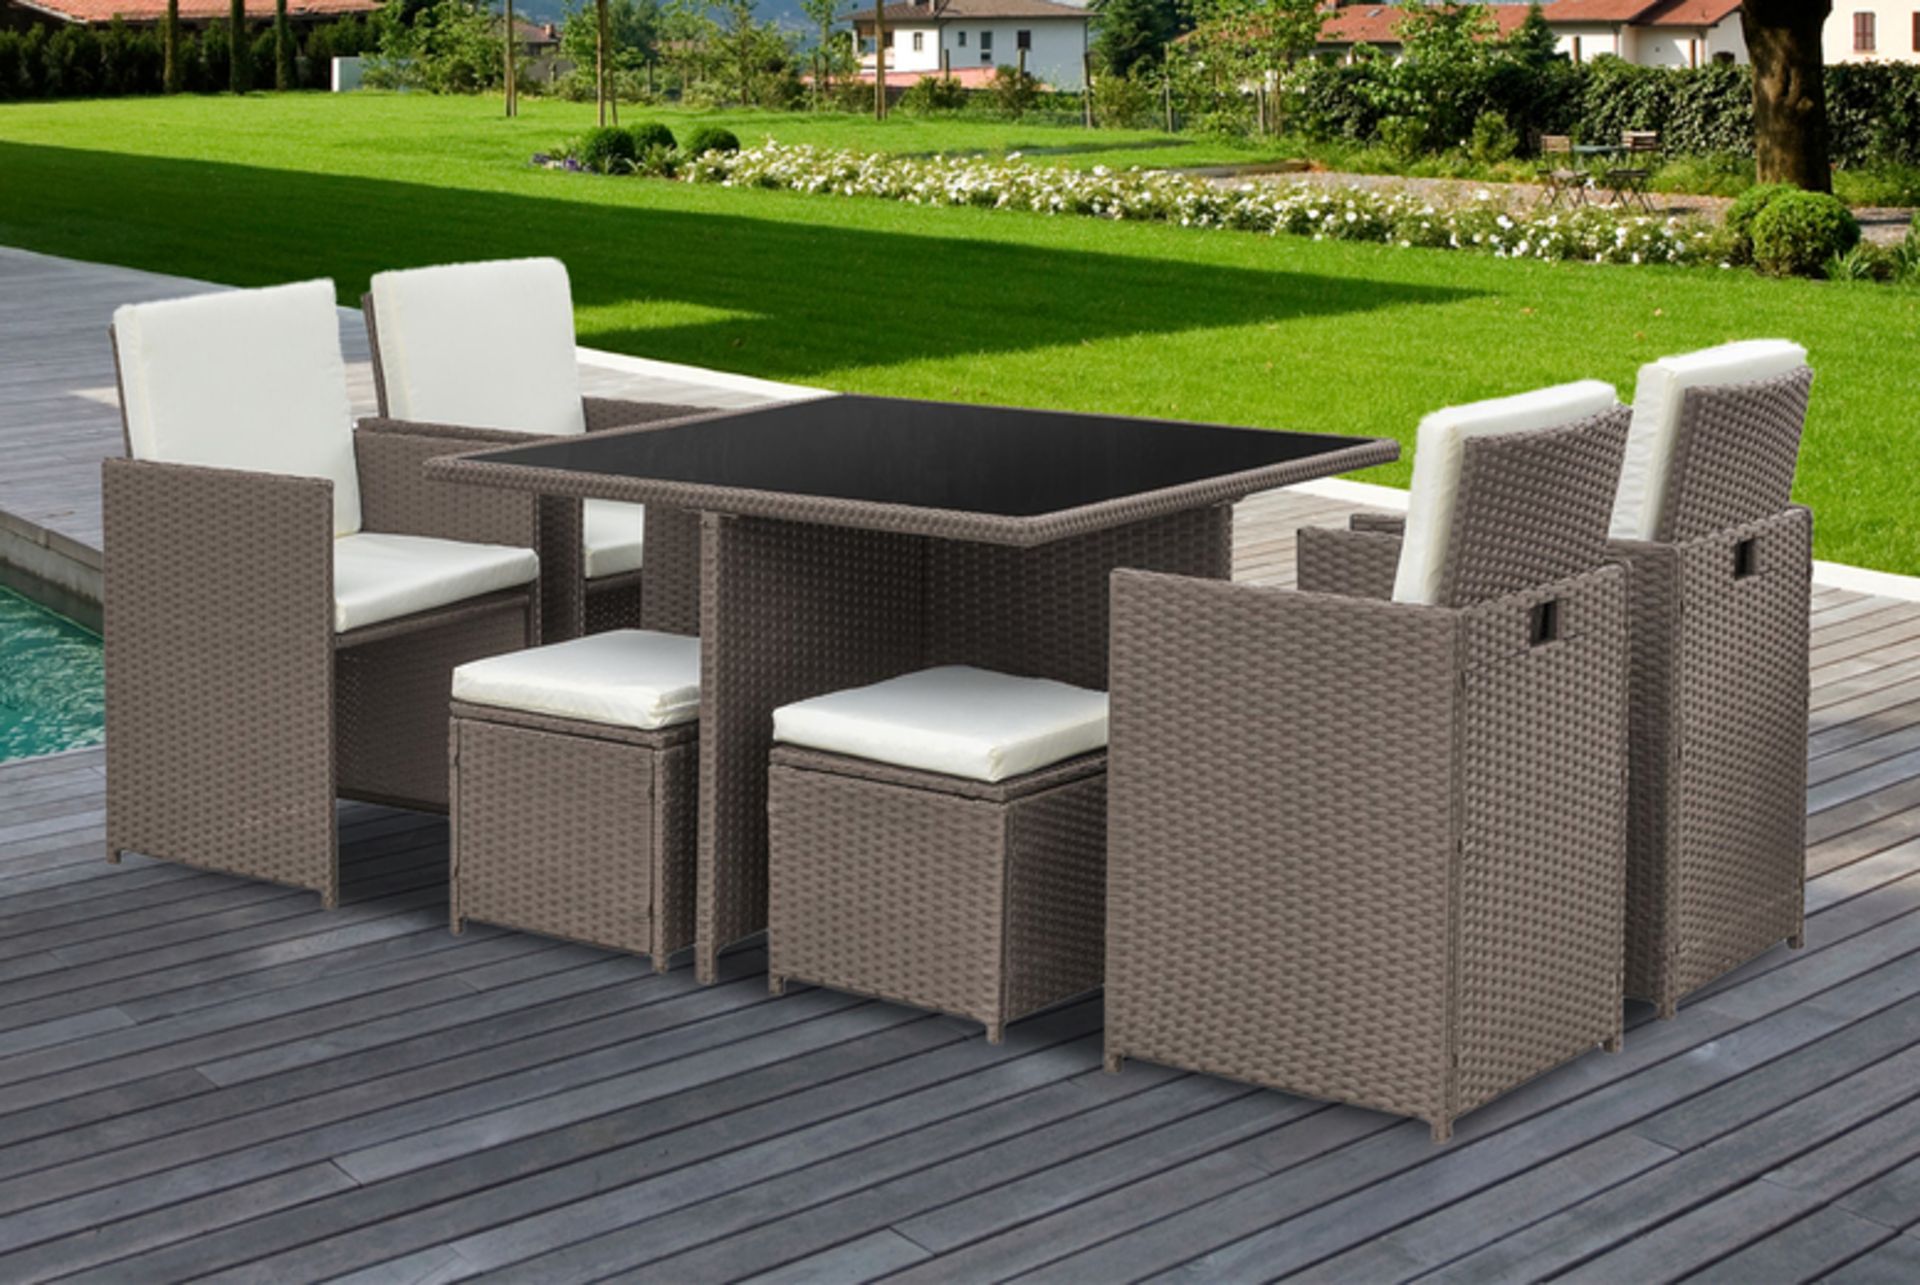 8-Seater Monument Rattan Cube Garden Furniture Dining Set - Brown - Image 3 of 3